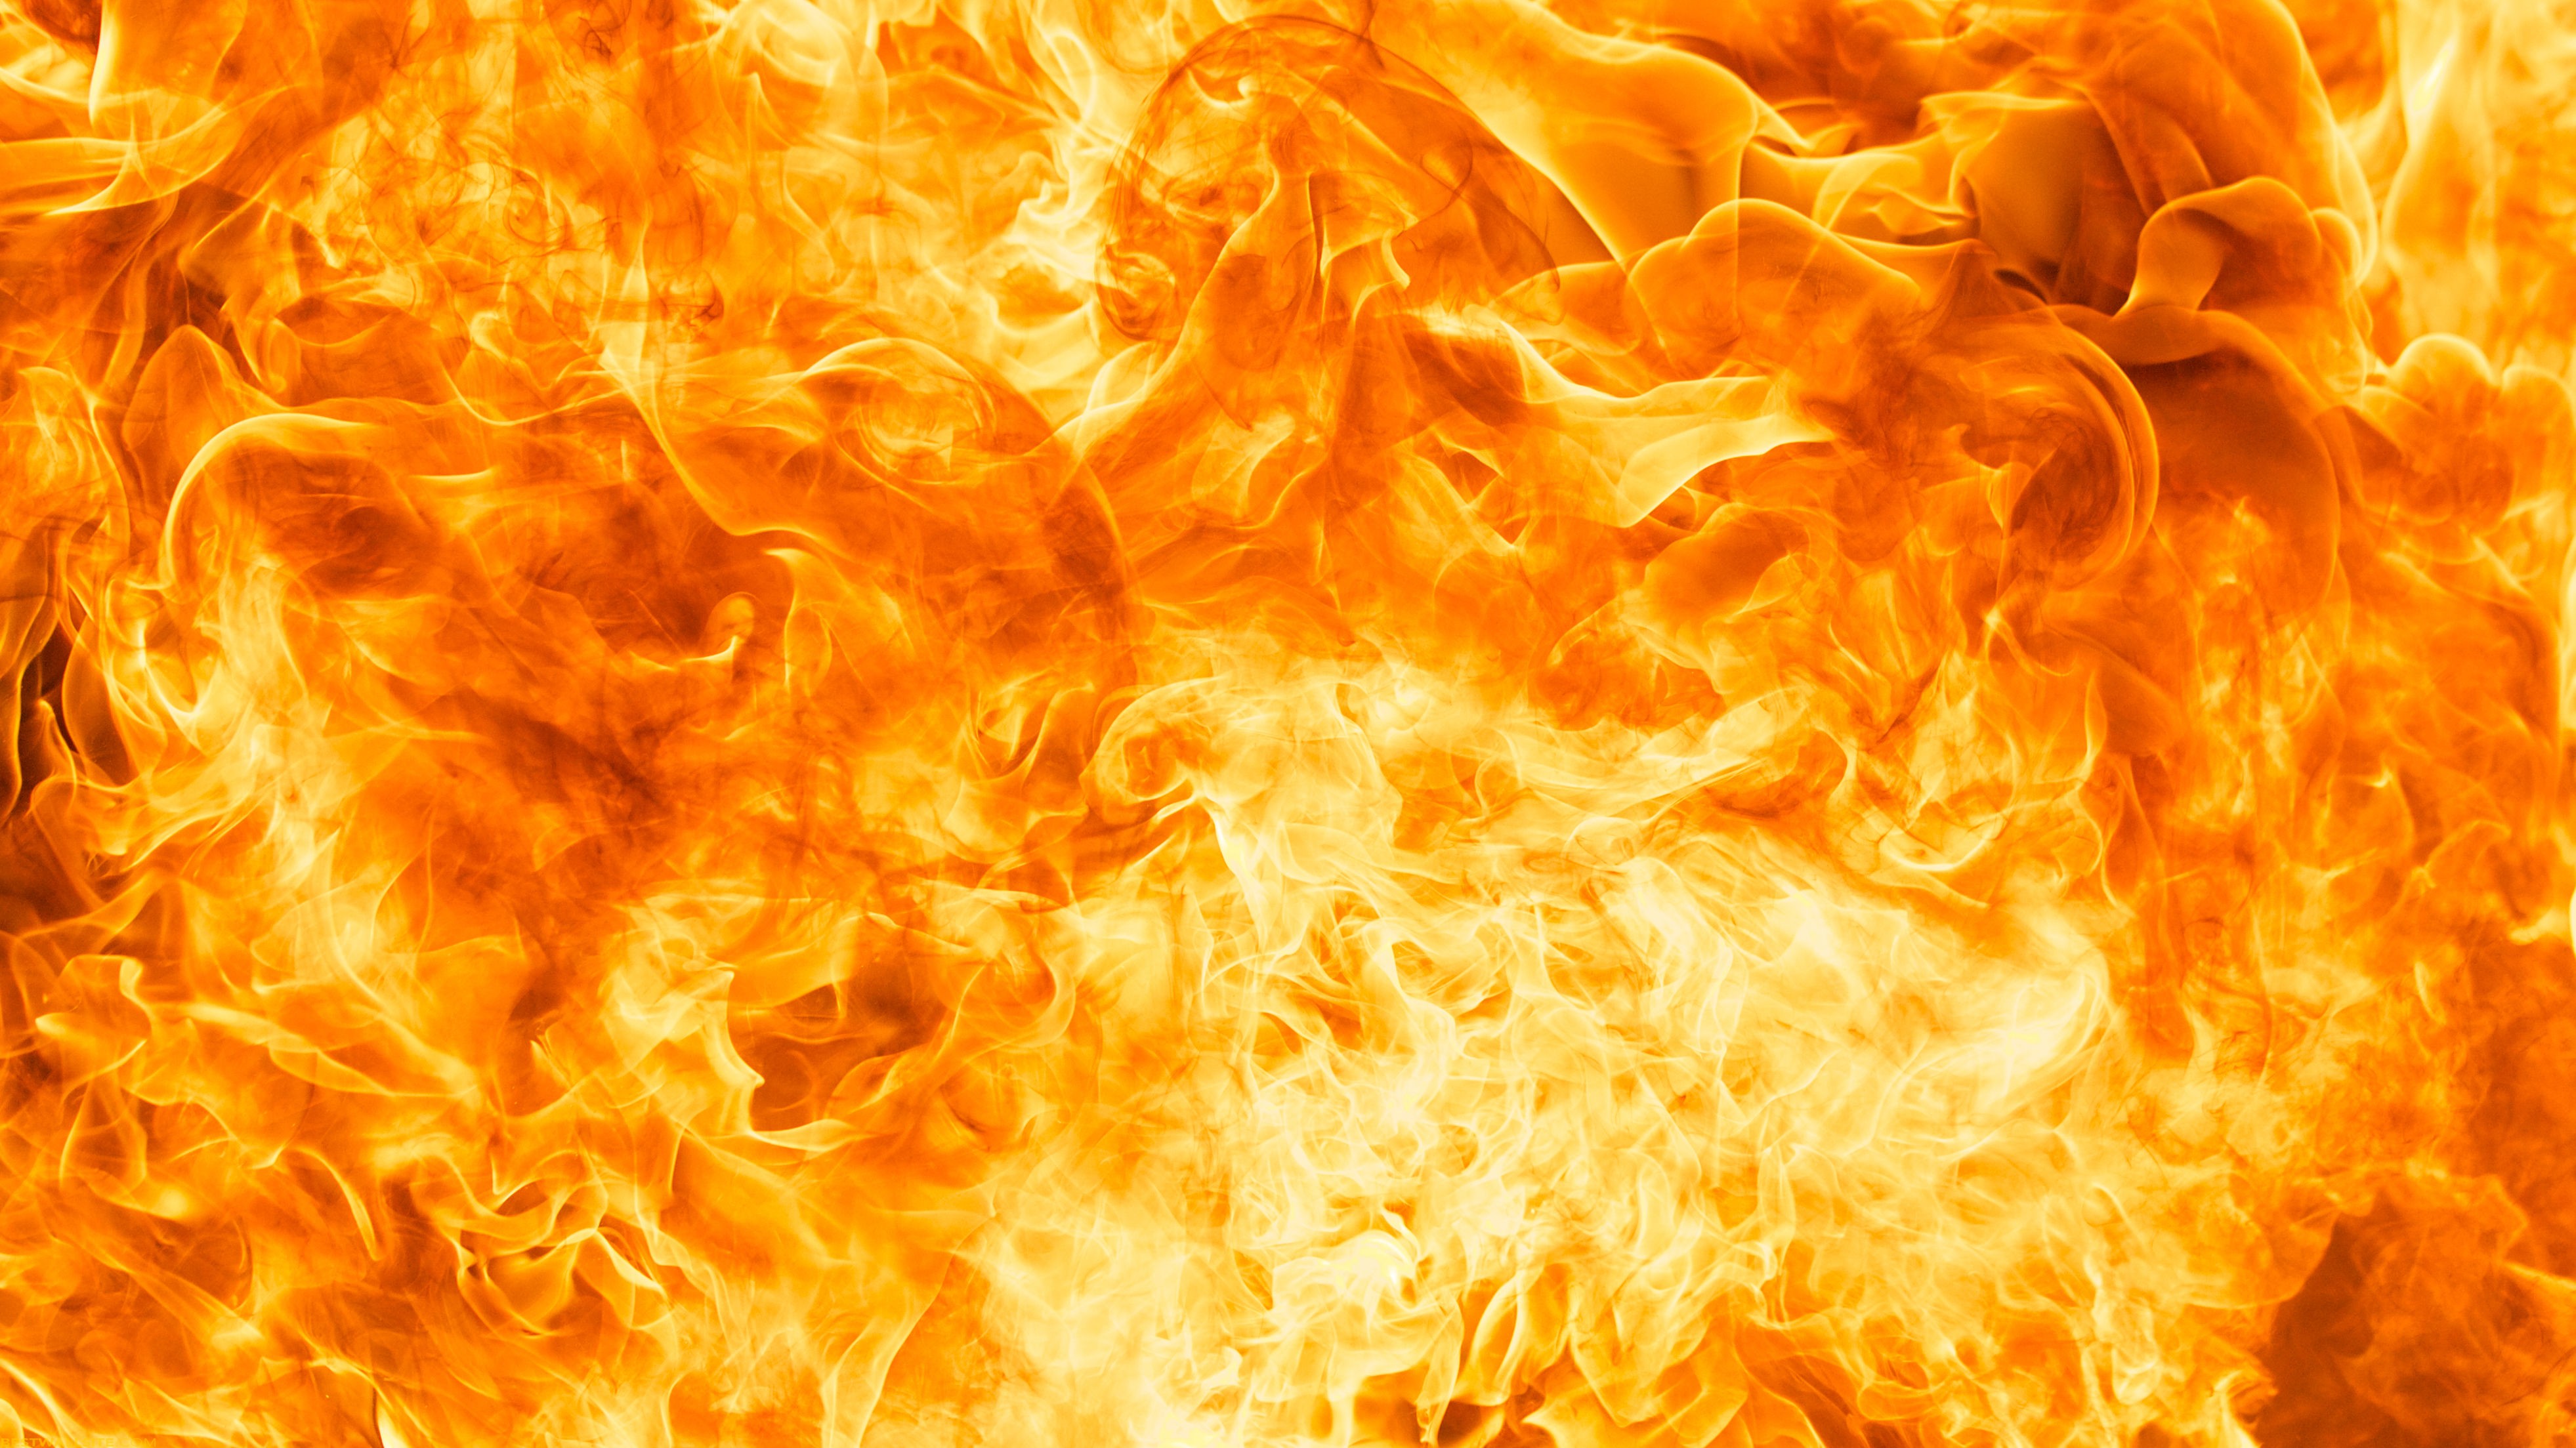 Fire Background Wallpaper Related Keywords amp Suggestions